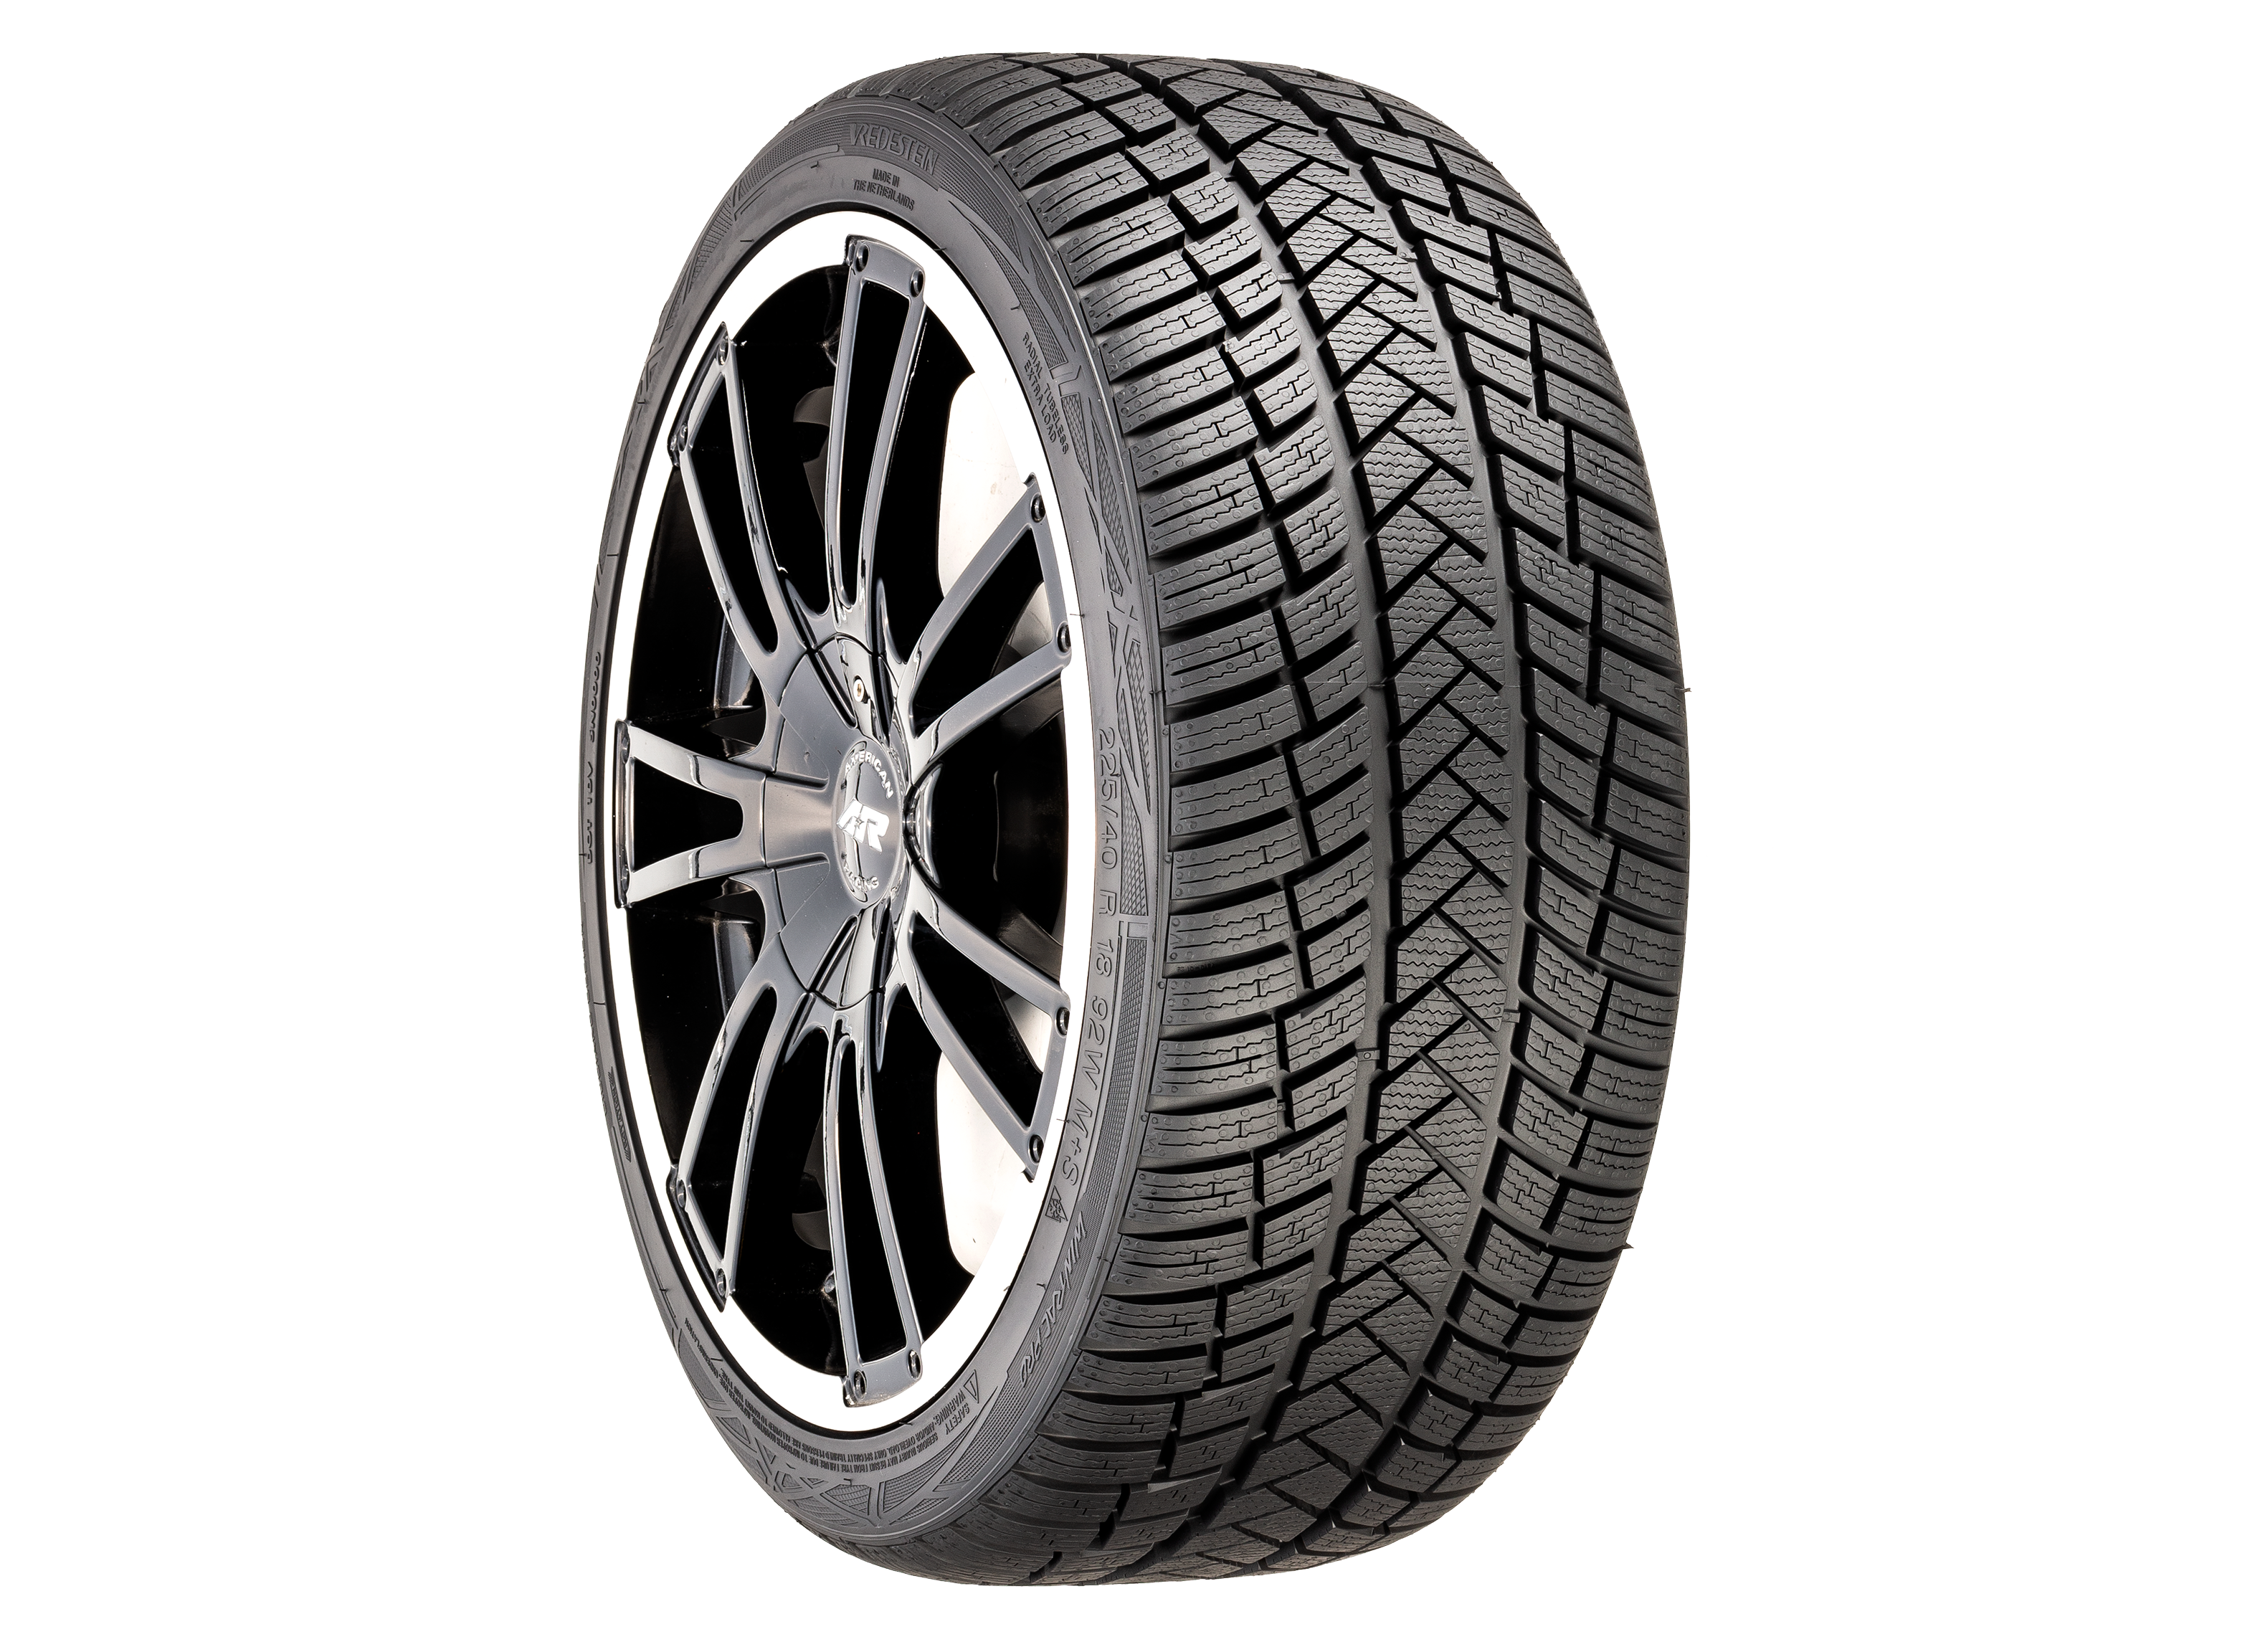 Vredestein Wintrac - Tire Consumer Review Reports Pro